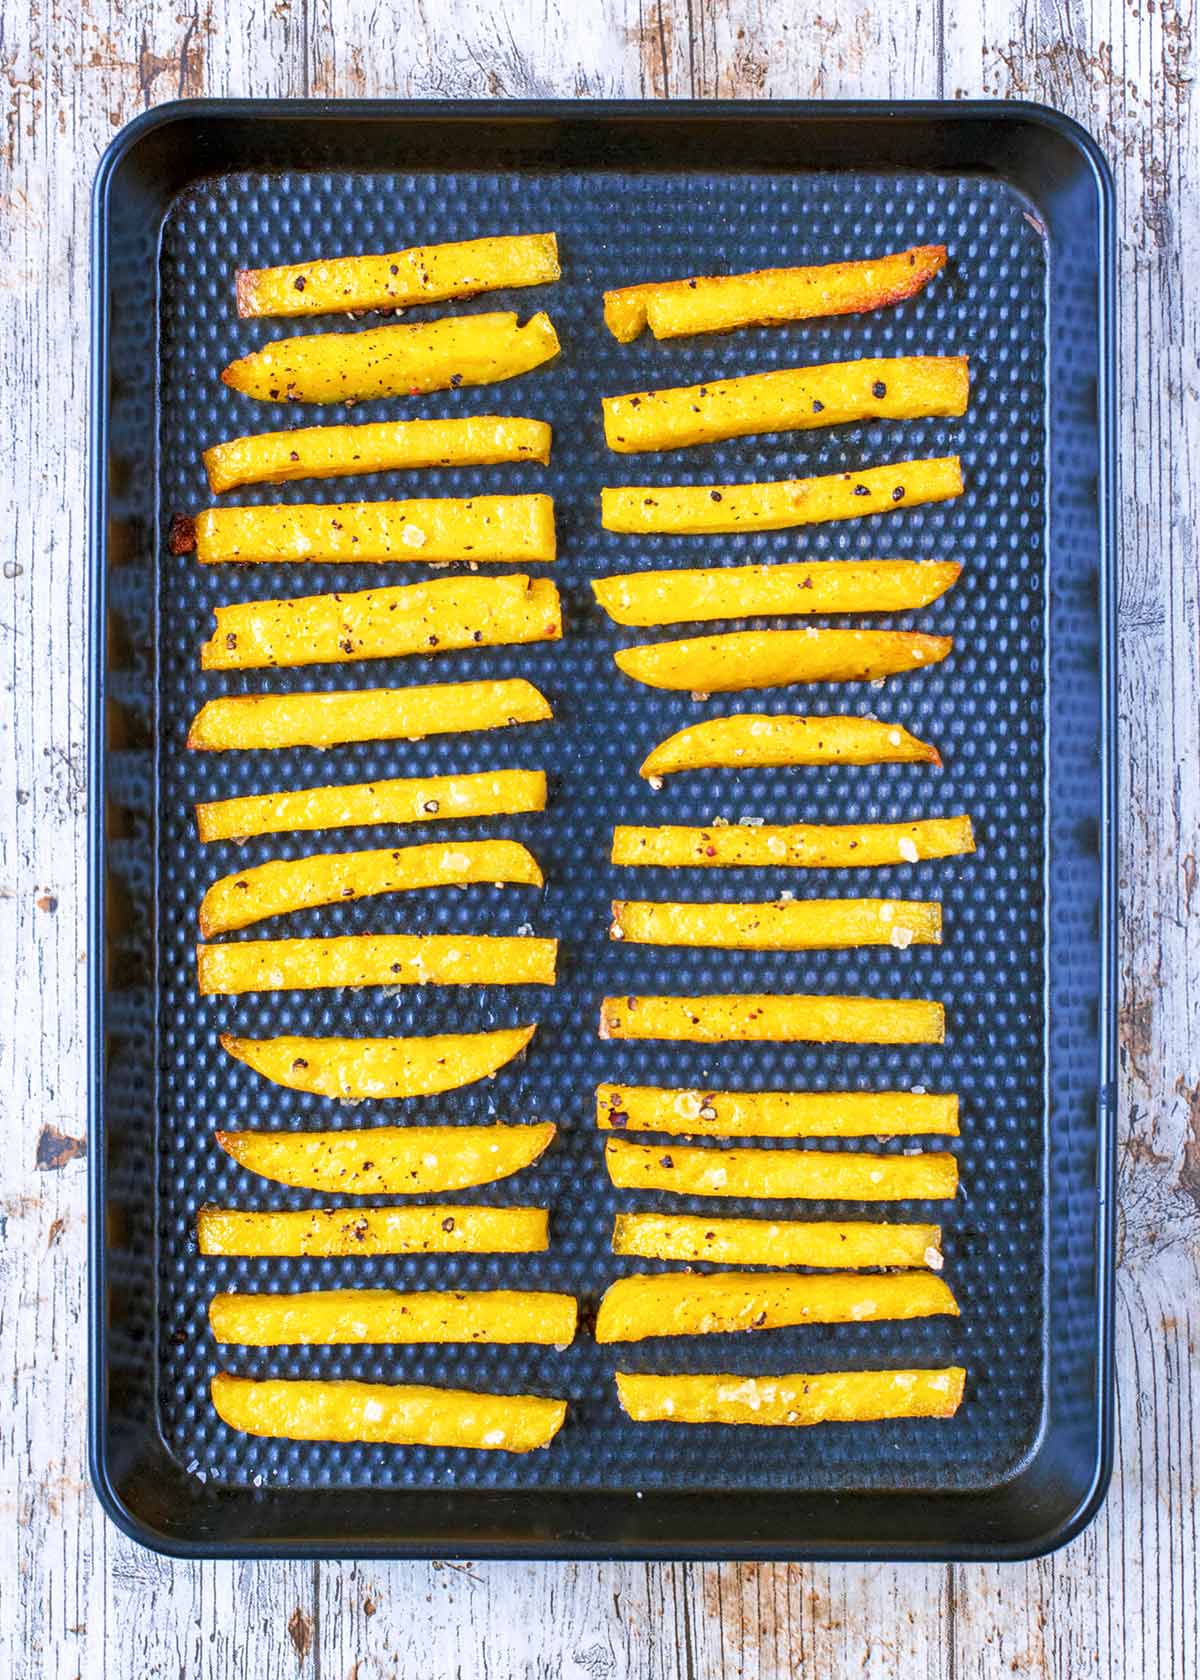 Oven Baked Polenta Fries on a black baking tray.